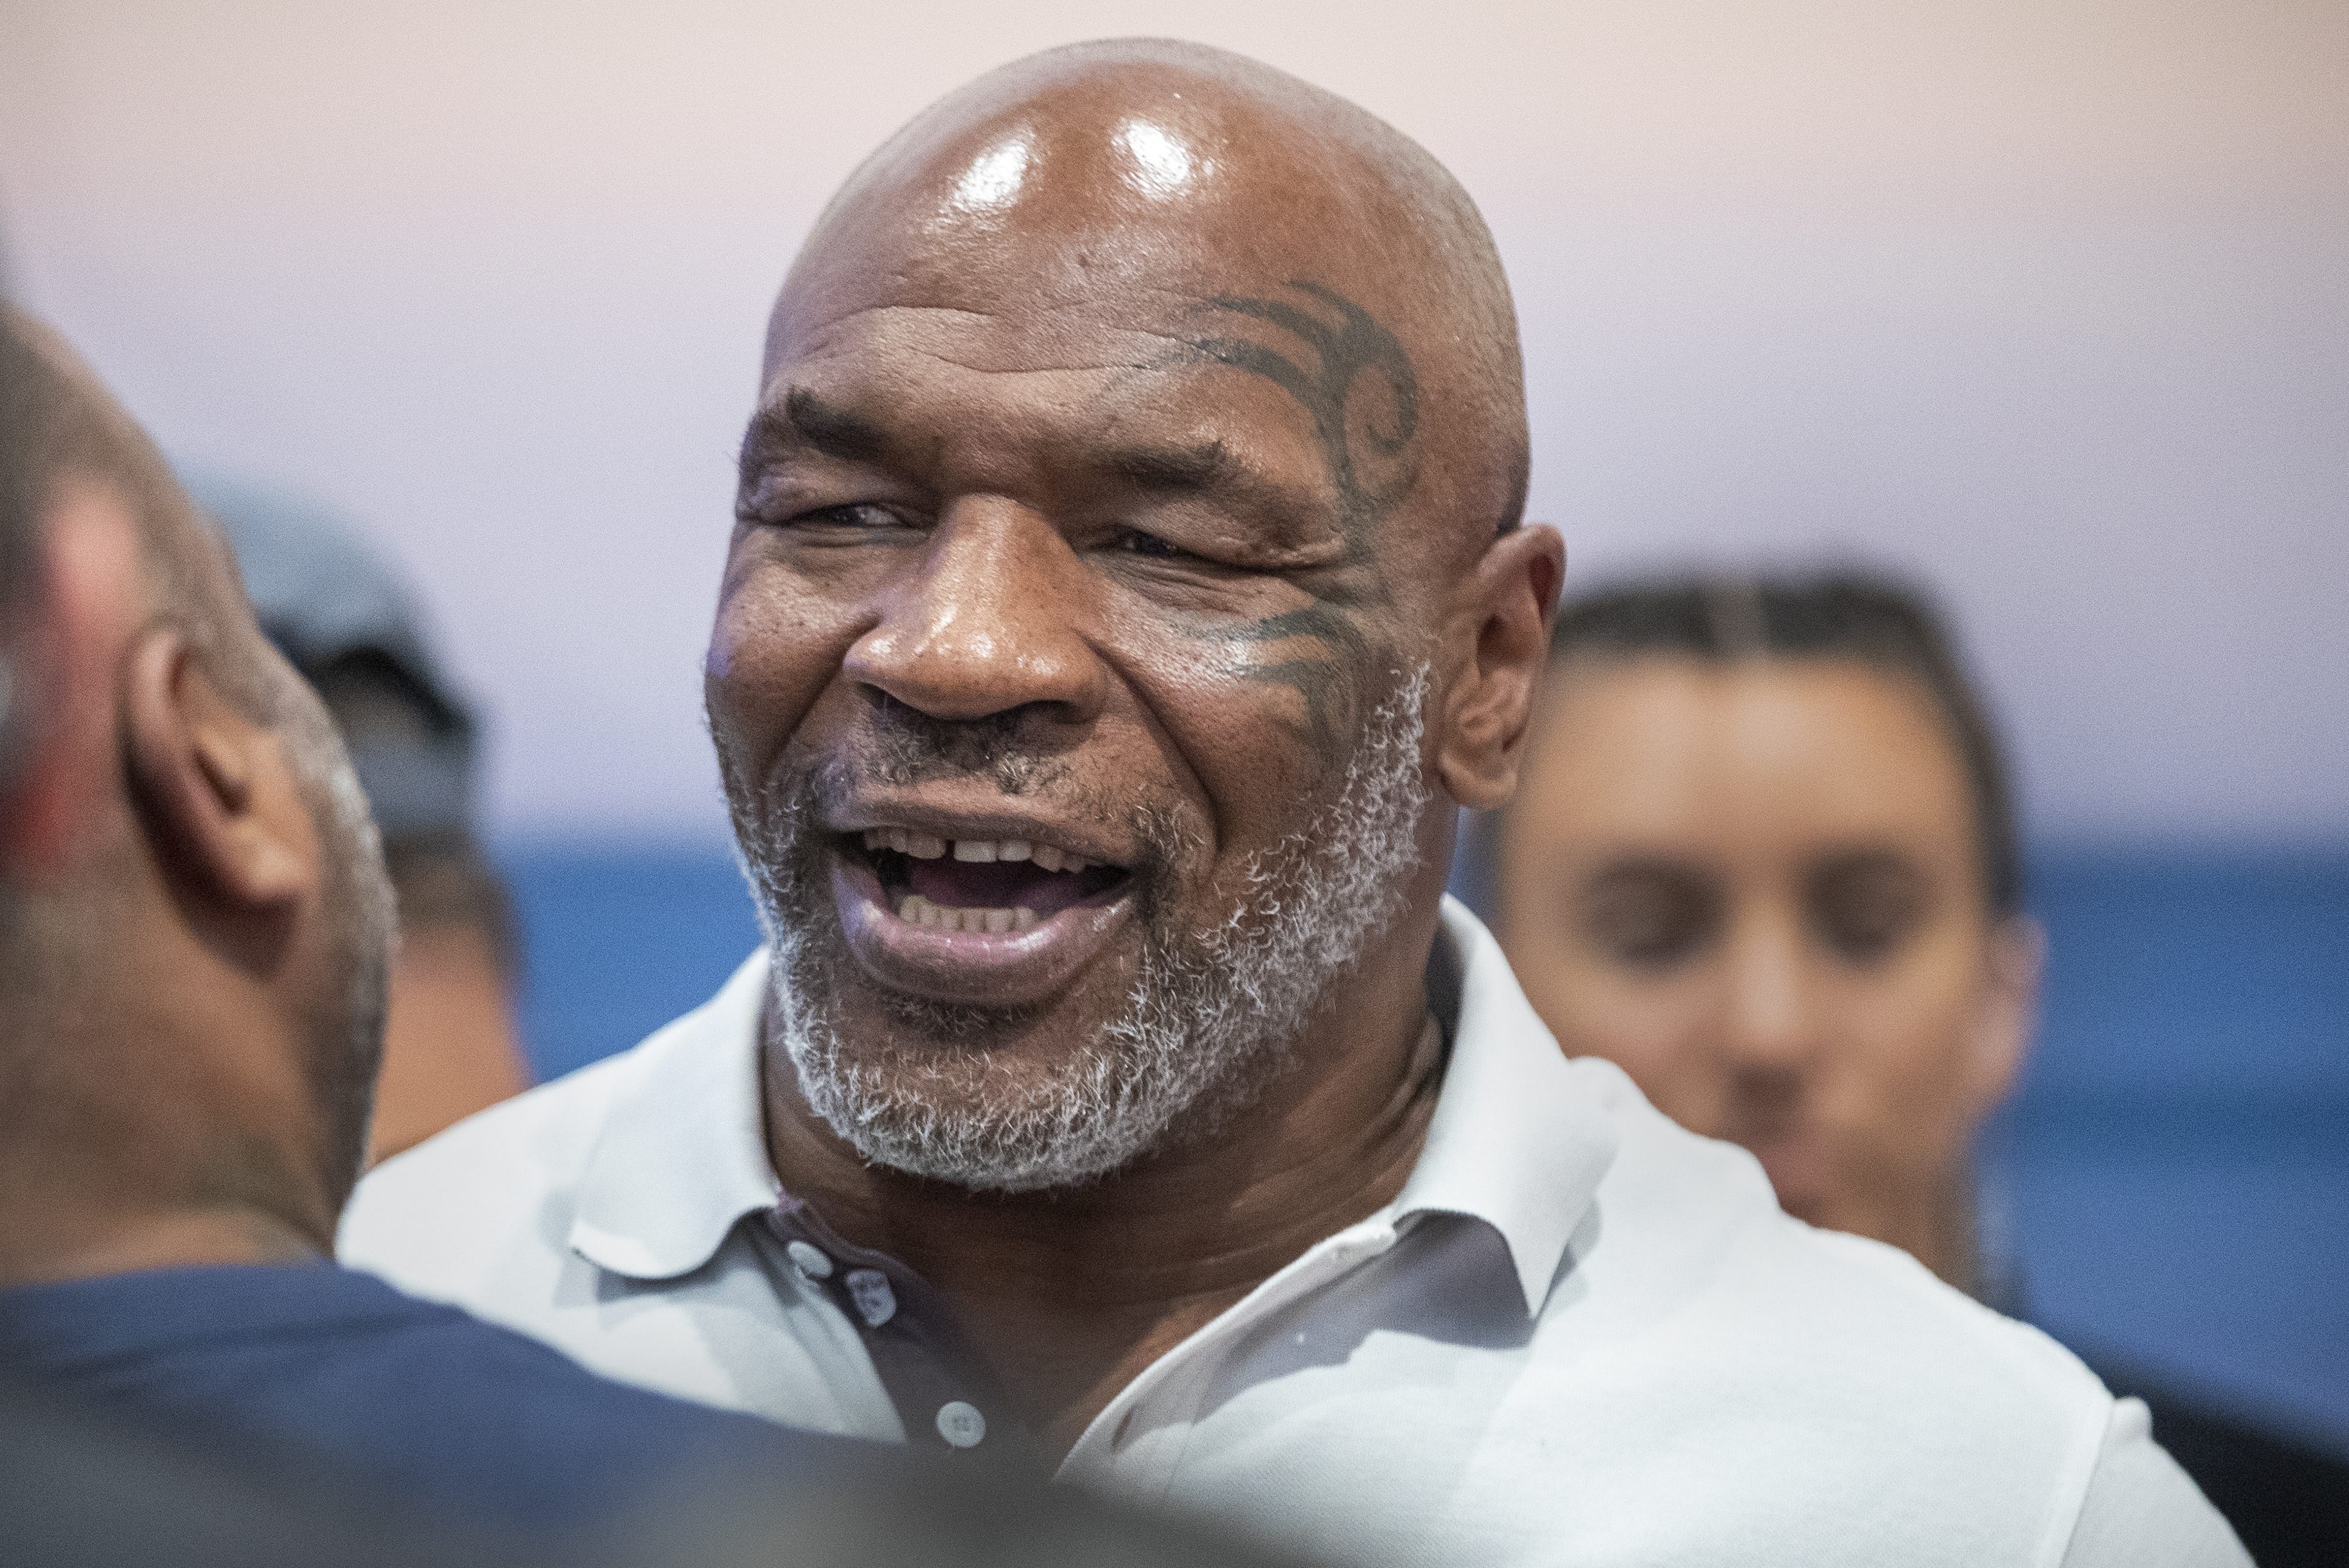 Ex-heavyweight champion Mike Tyson signing autographs in 2021. He recently said he'd be open to fighting Jake Paul or Logan Paul in a boxing match.